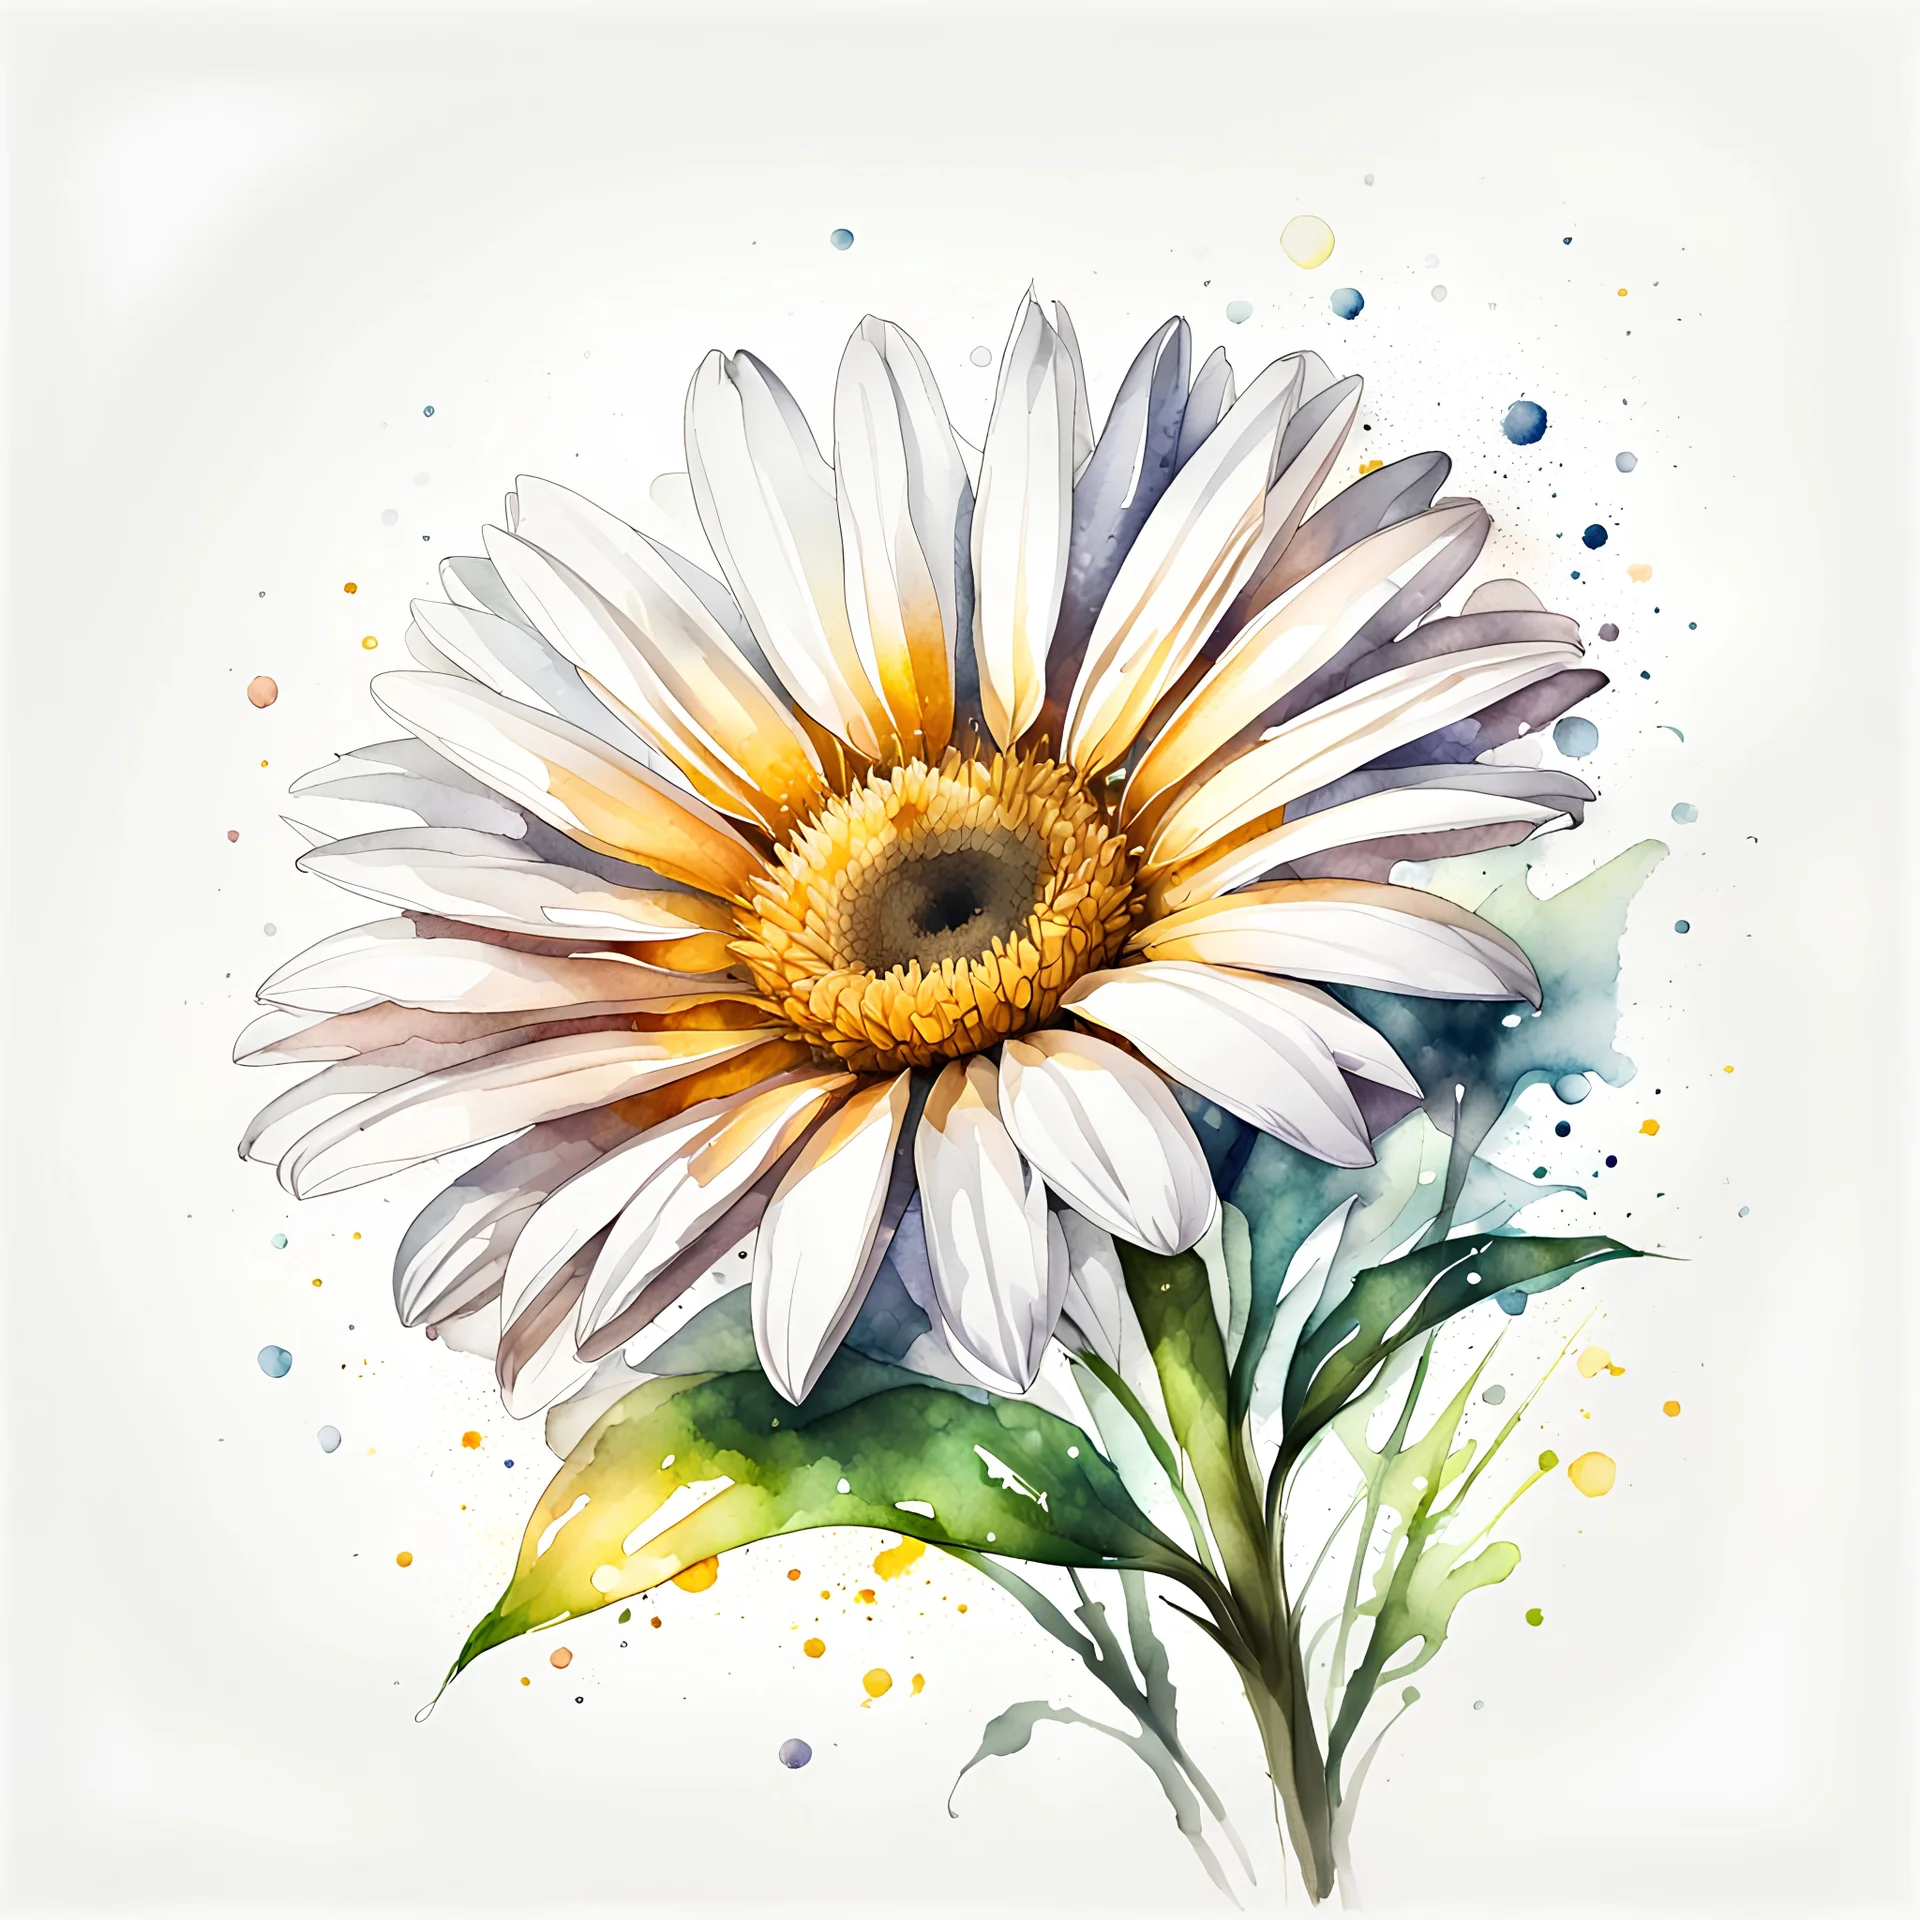 watercolor drawing of a daisy flower on a white background, Trending on Artstation, {creative commons}, fanart, AIart, {Woolitize}, by Charlie Bowater, Illustration, Color Grading, Filmic, Nikon D750, Brenizer Method, Perspective, Depth of Field, Field of View, F/2.8, Lens Flare, Tonal Colors, 8K, Full-HD, ProPhoto RGB, Perfectionism, Rim Lighting, Natural Lighting, Soft Lig